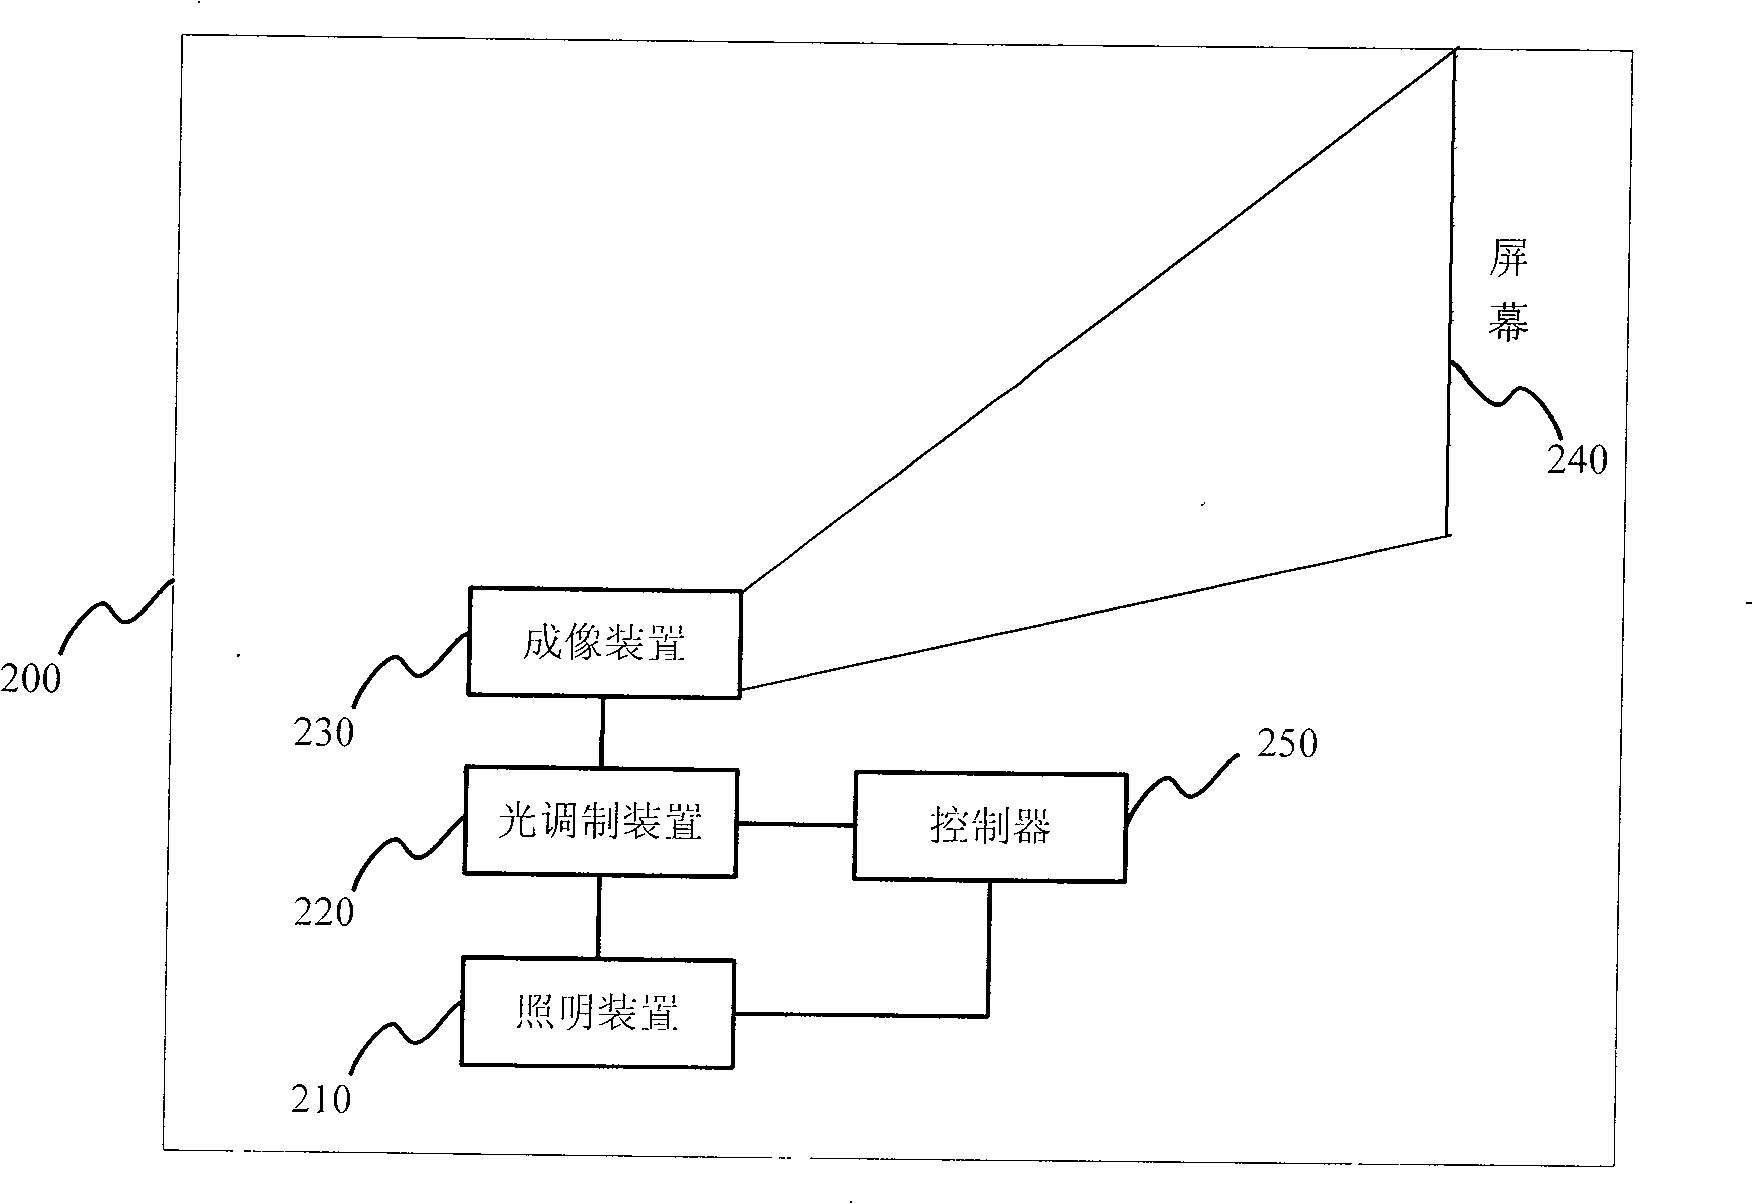 Method for displaying projection